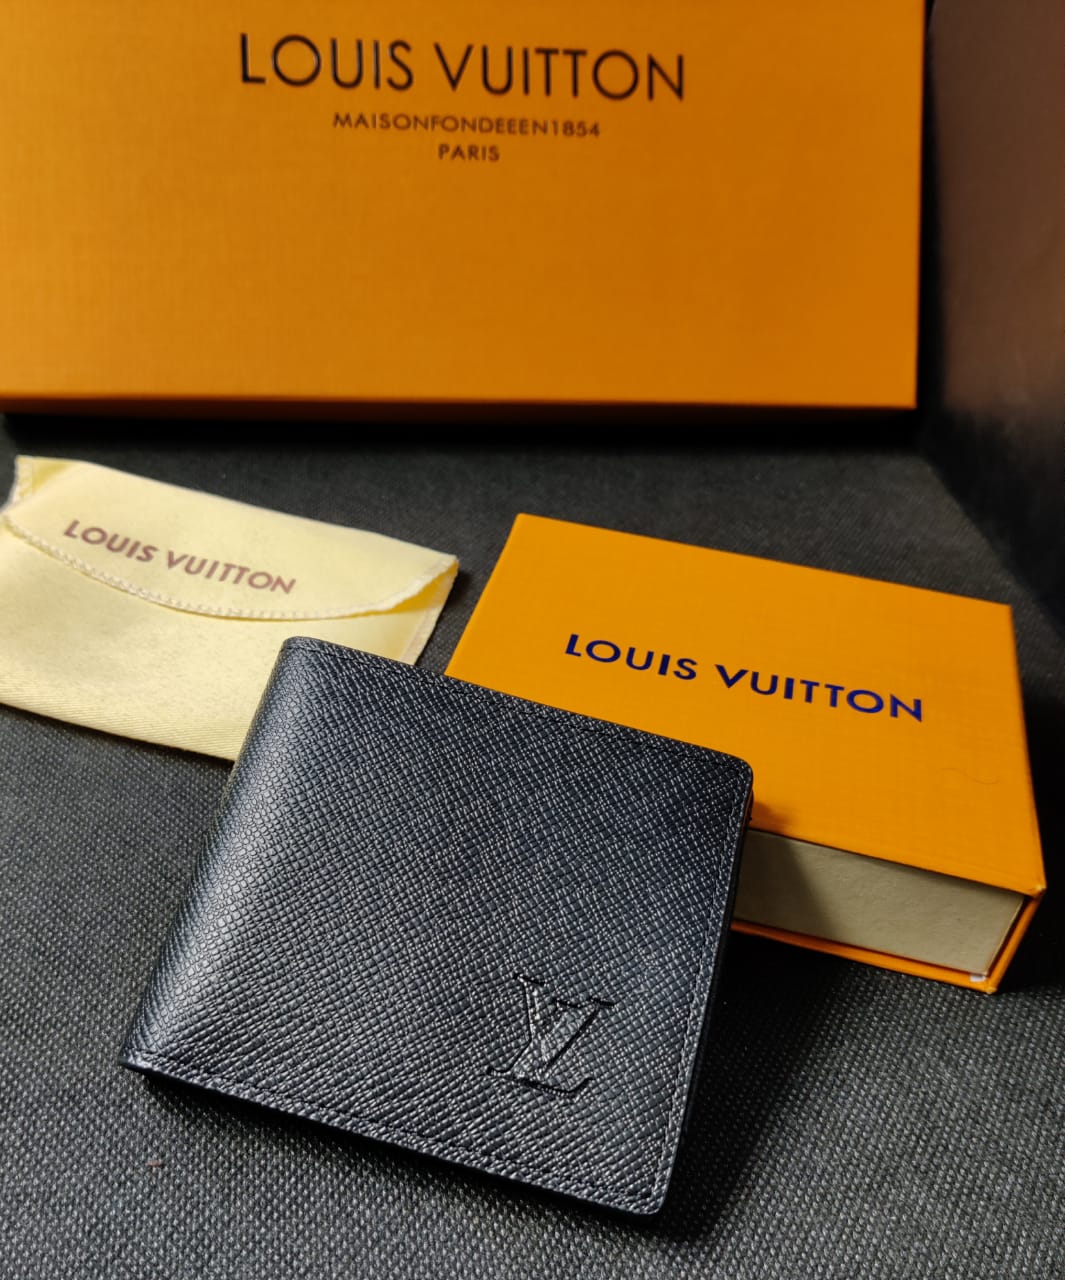 Louis Vuitton Leather Heavy quality latest full Black printed design wallet for men's LV-703